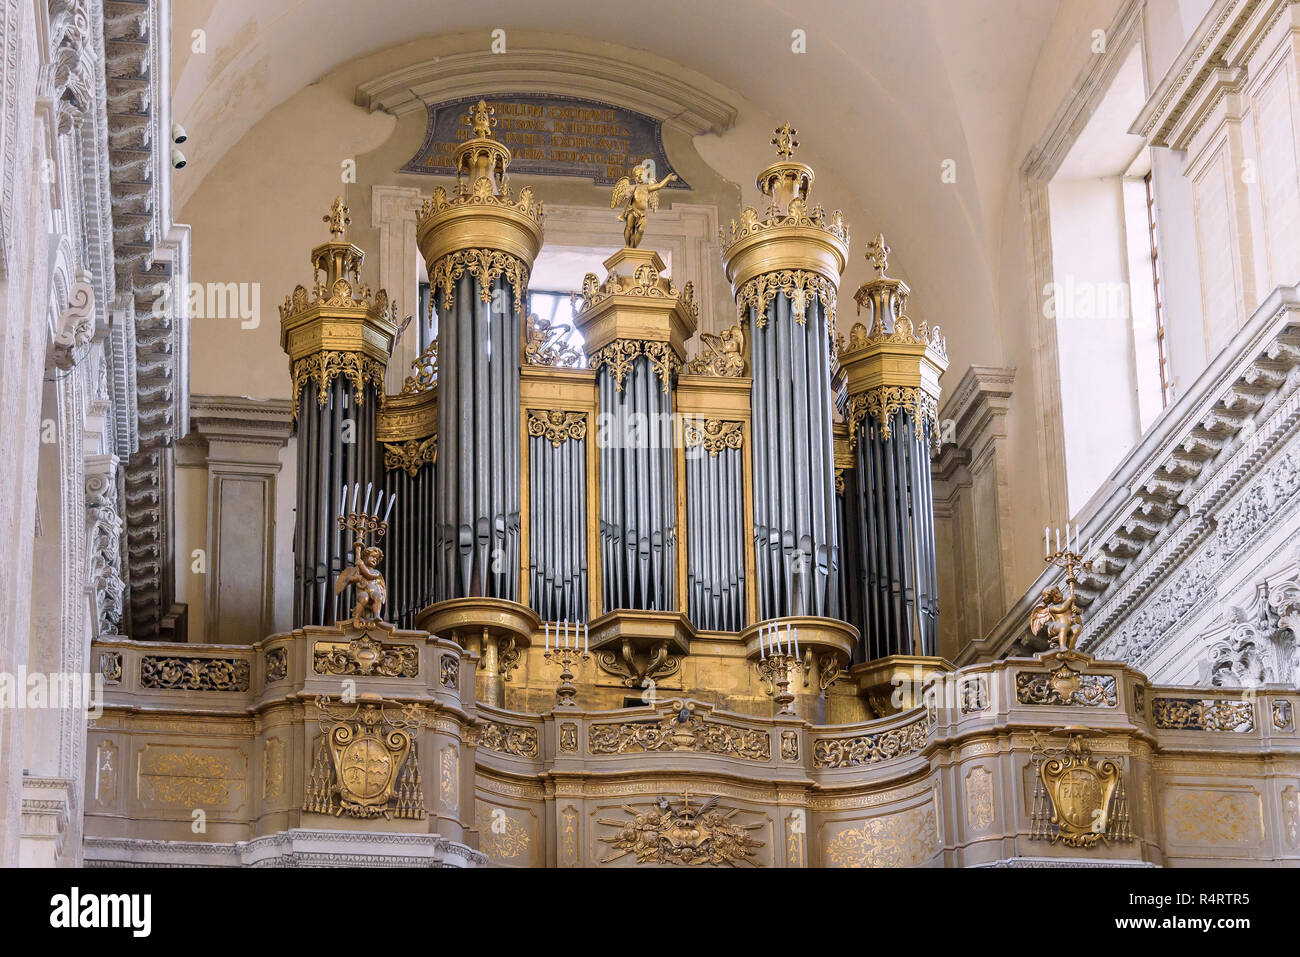 Catania, Sizilien, Italien - 23 August 2017: Orgel in der Kathedrale von St. Agatha in Catania. Stockfoto